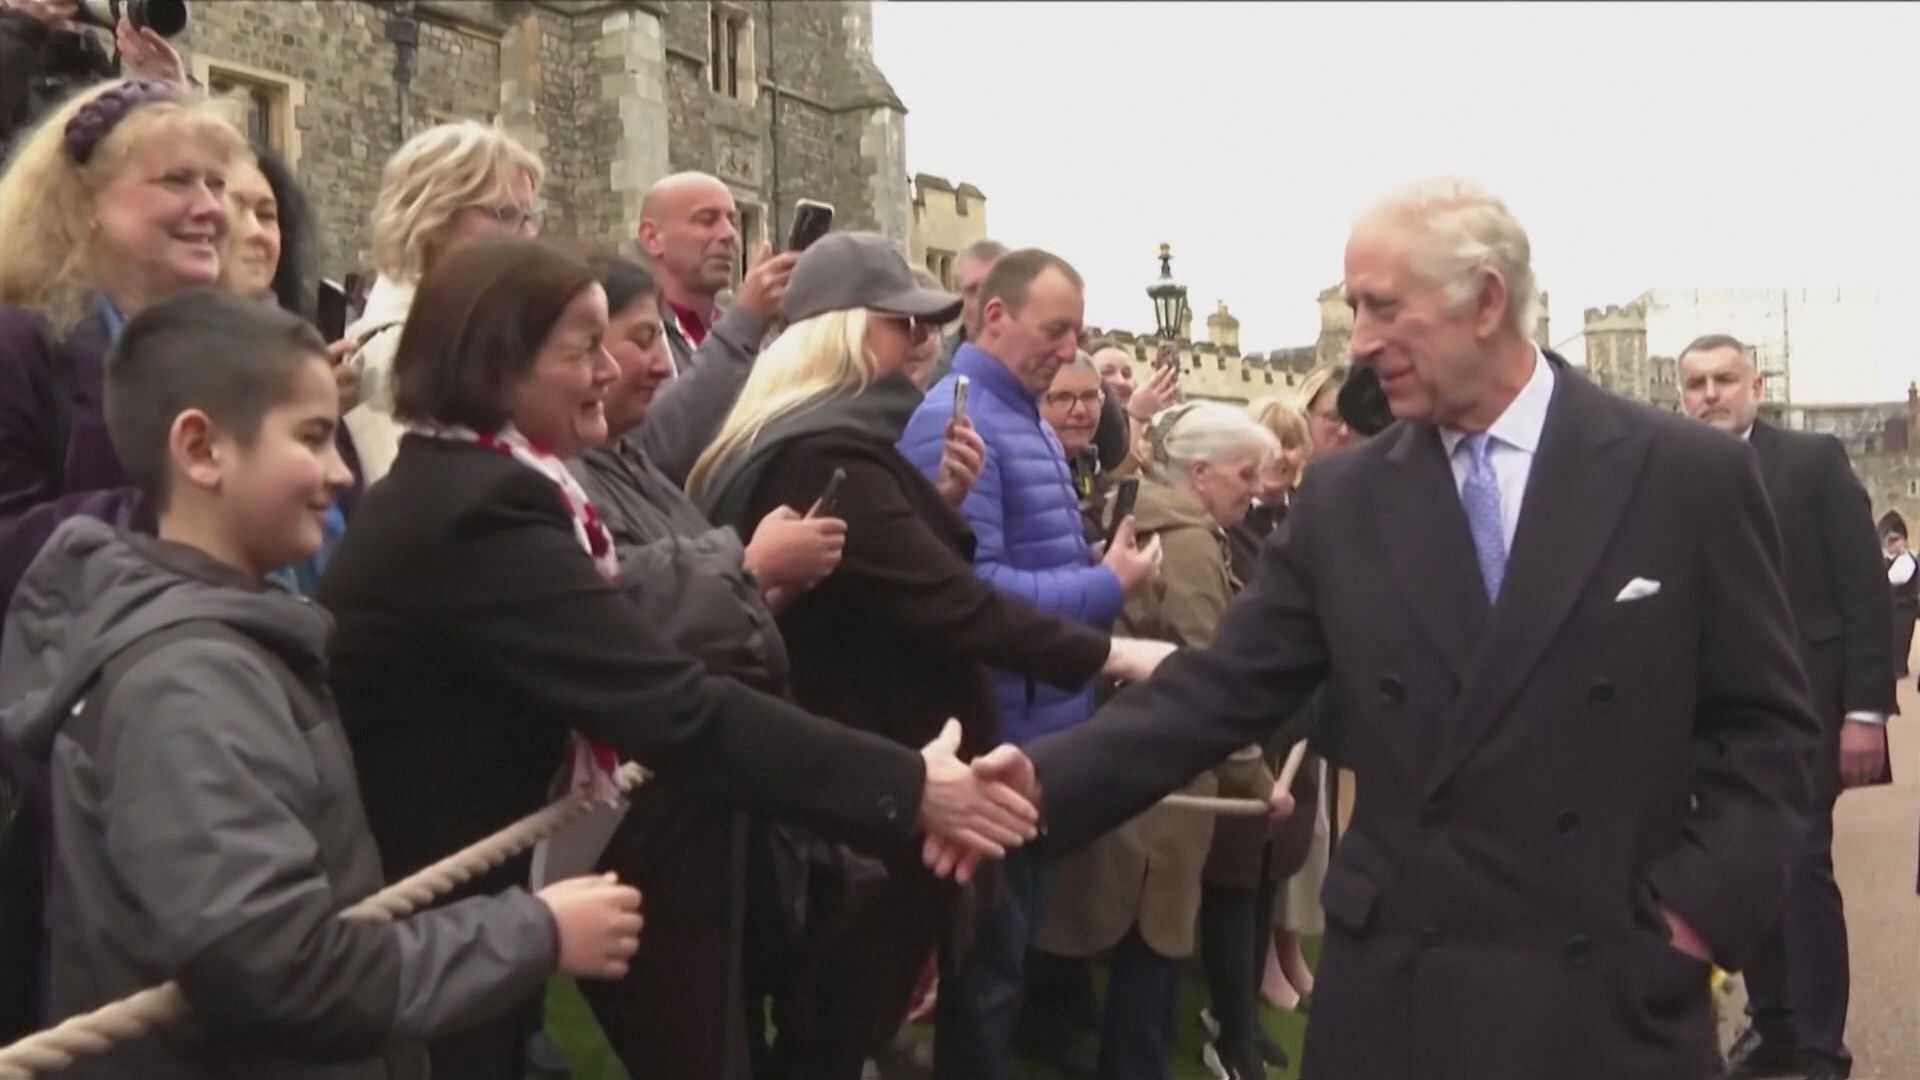 King Charles greets public after cancer diagnosis